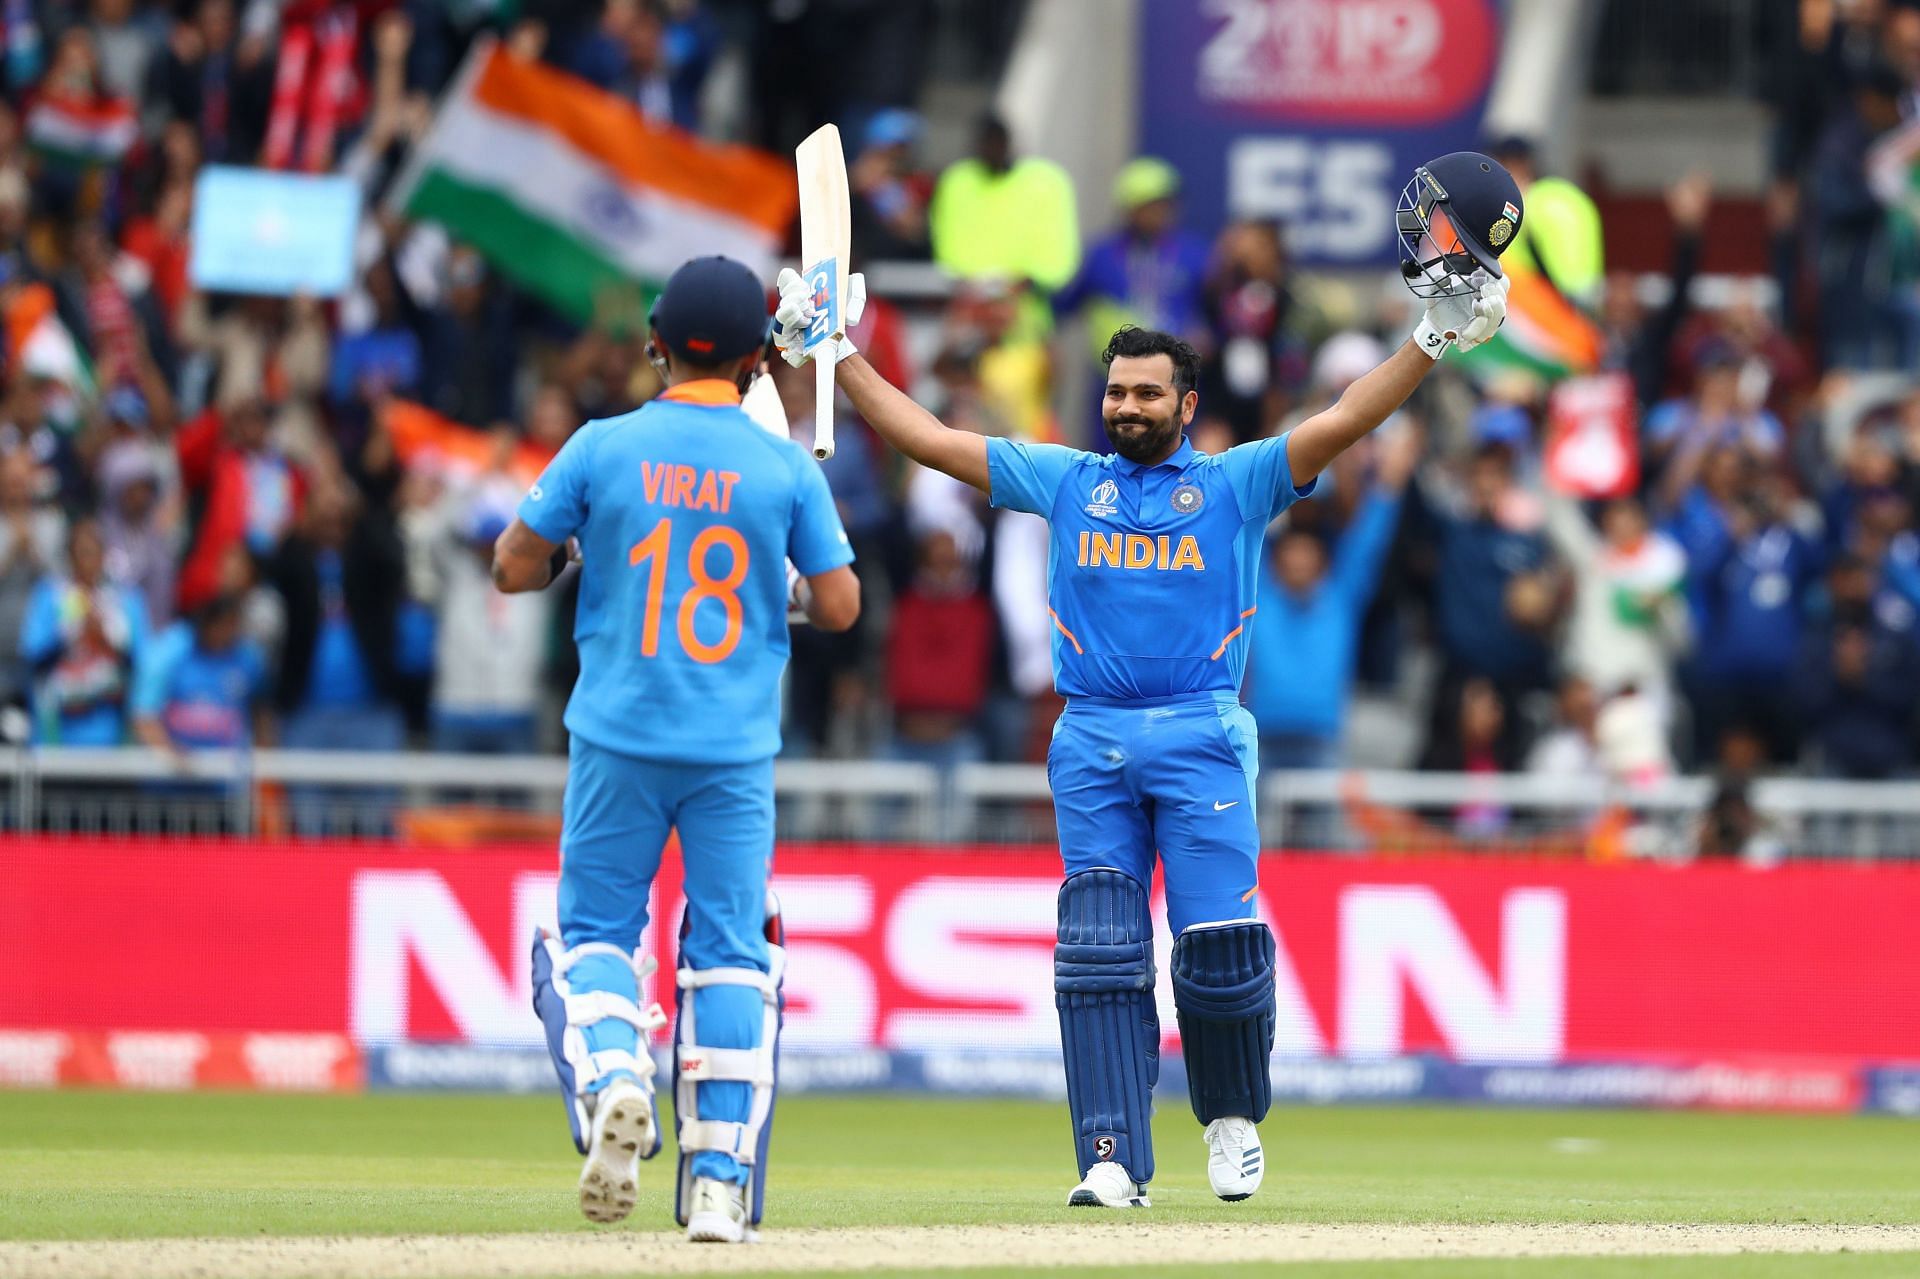 India v Pakistan - ICC Cricket World Cup 2019 [Pic Credit: Getty Images]